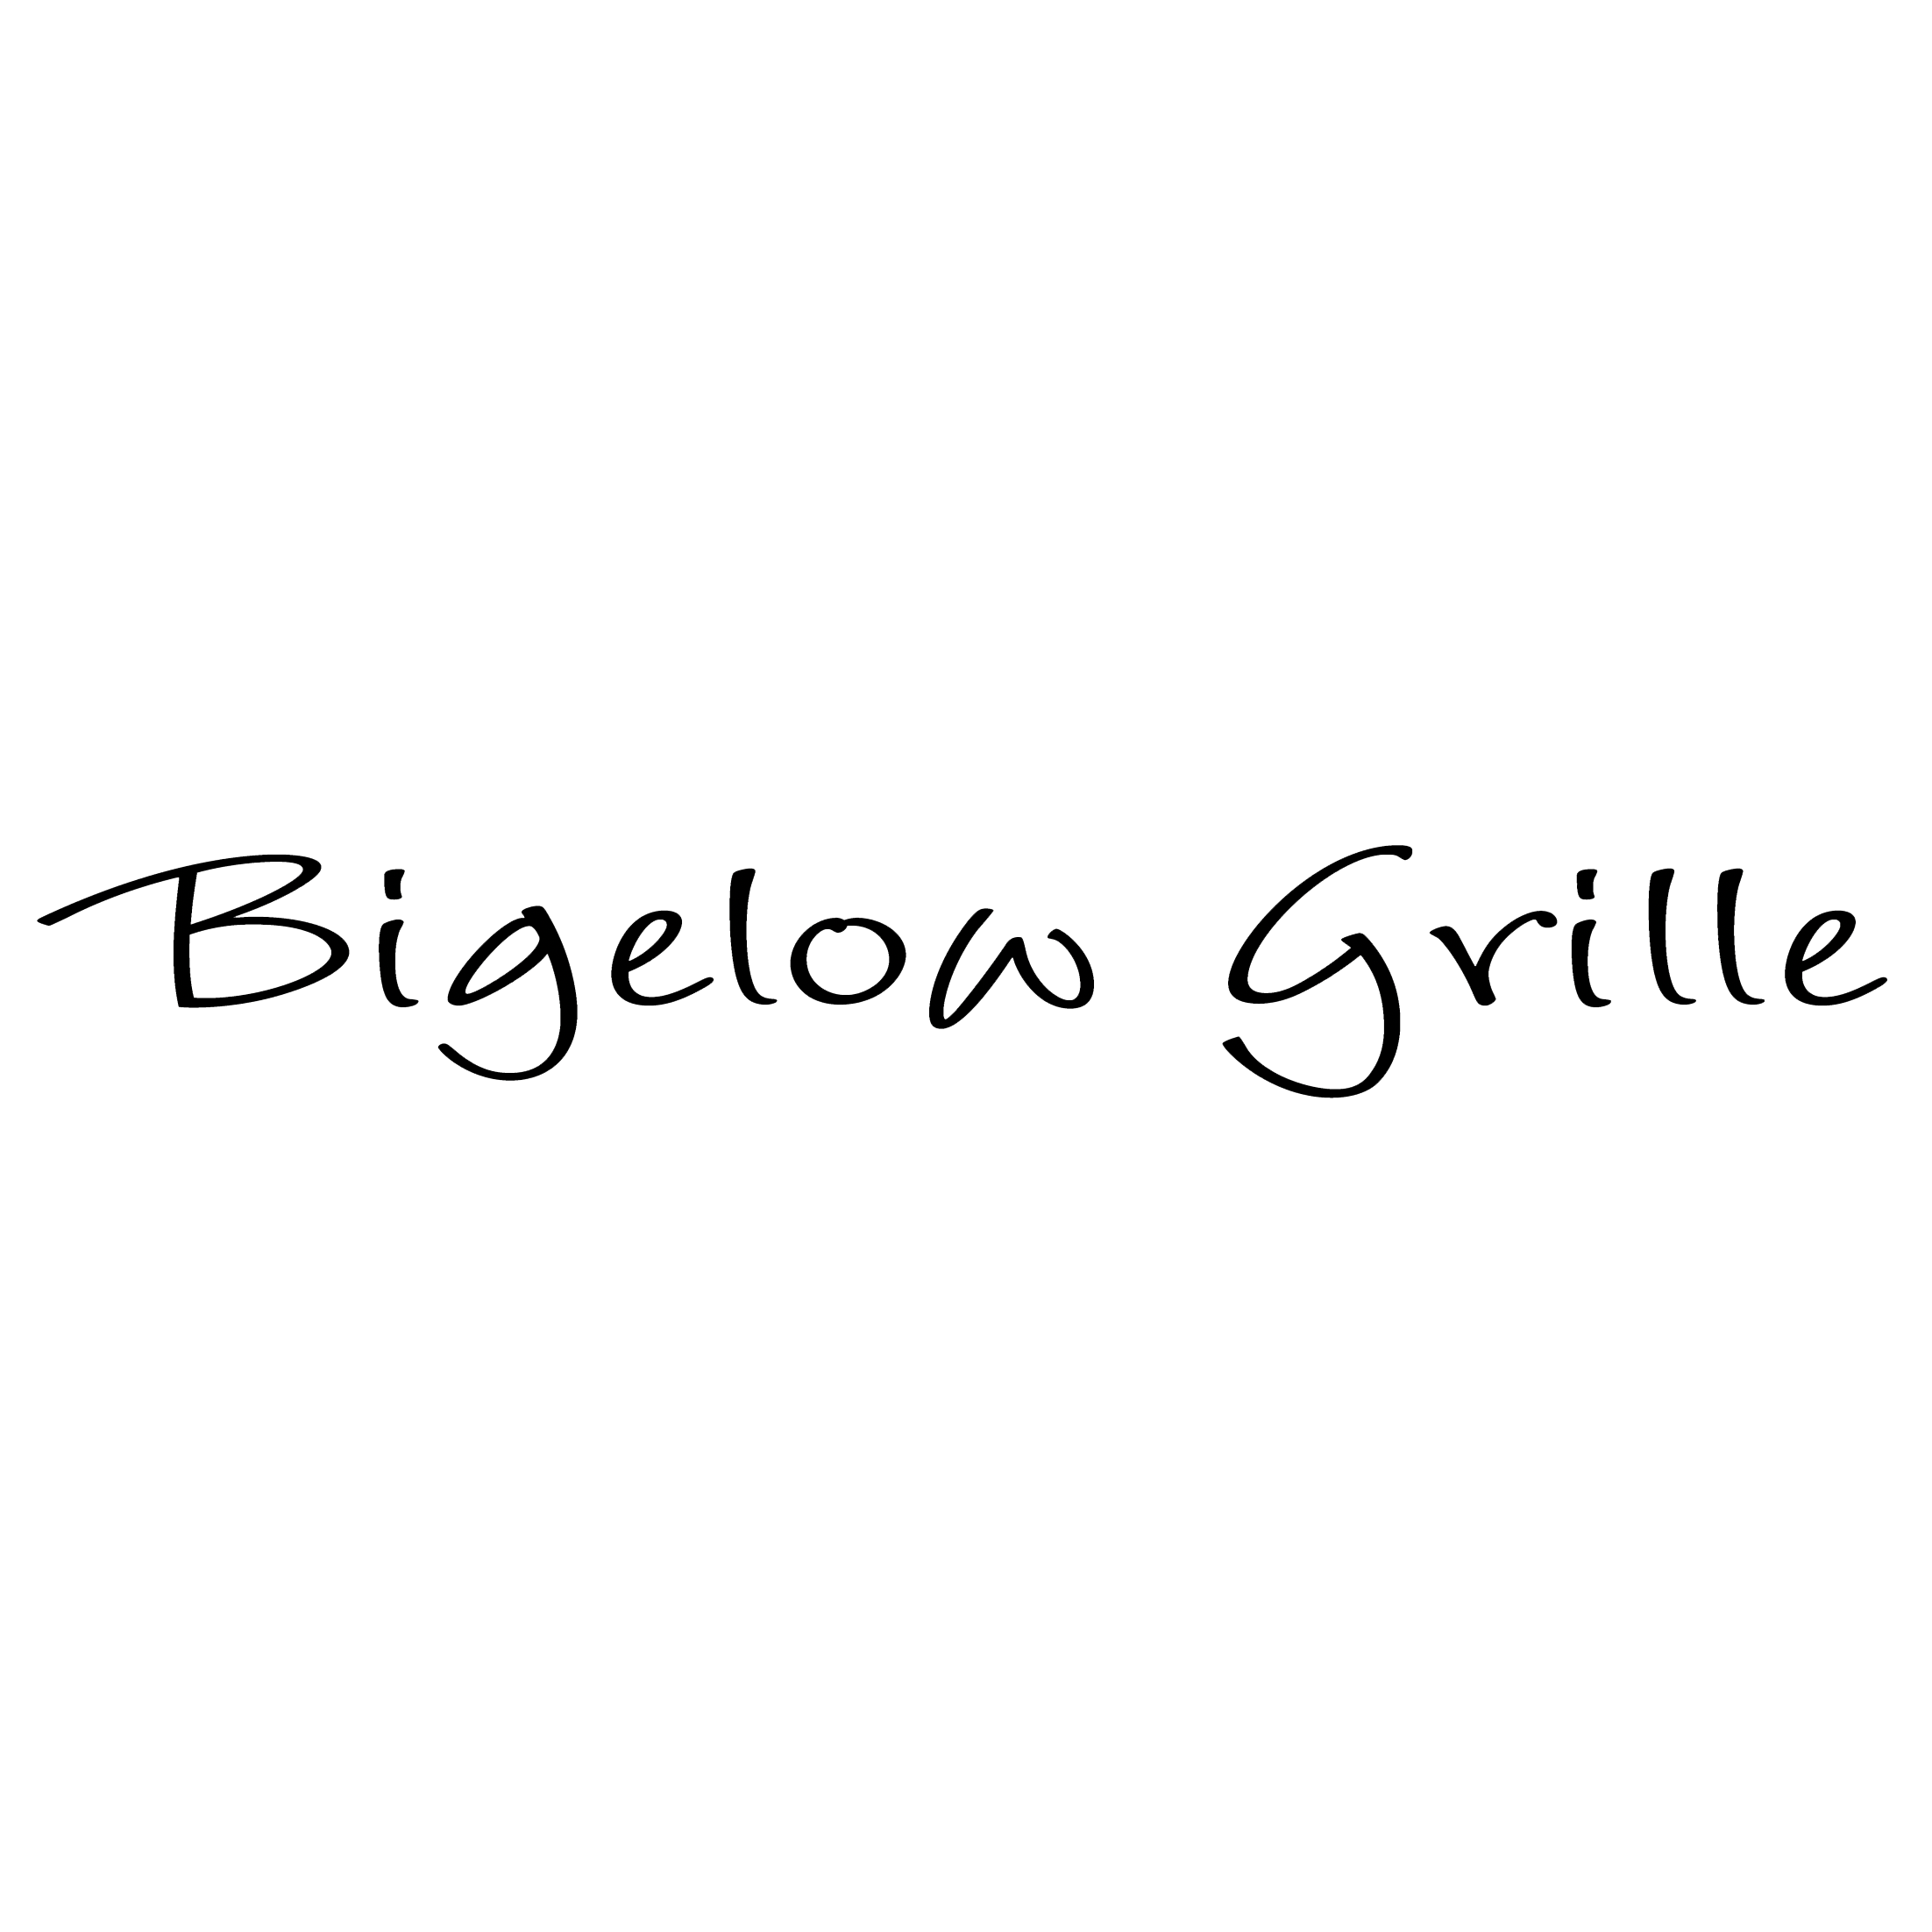 The Bigelow Grille